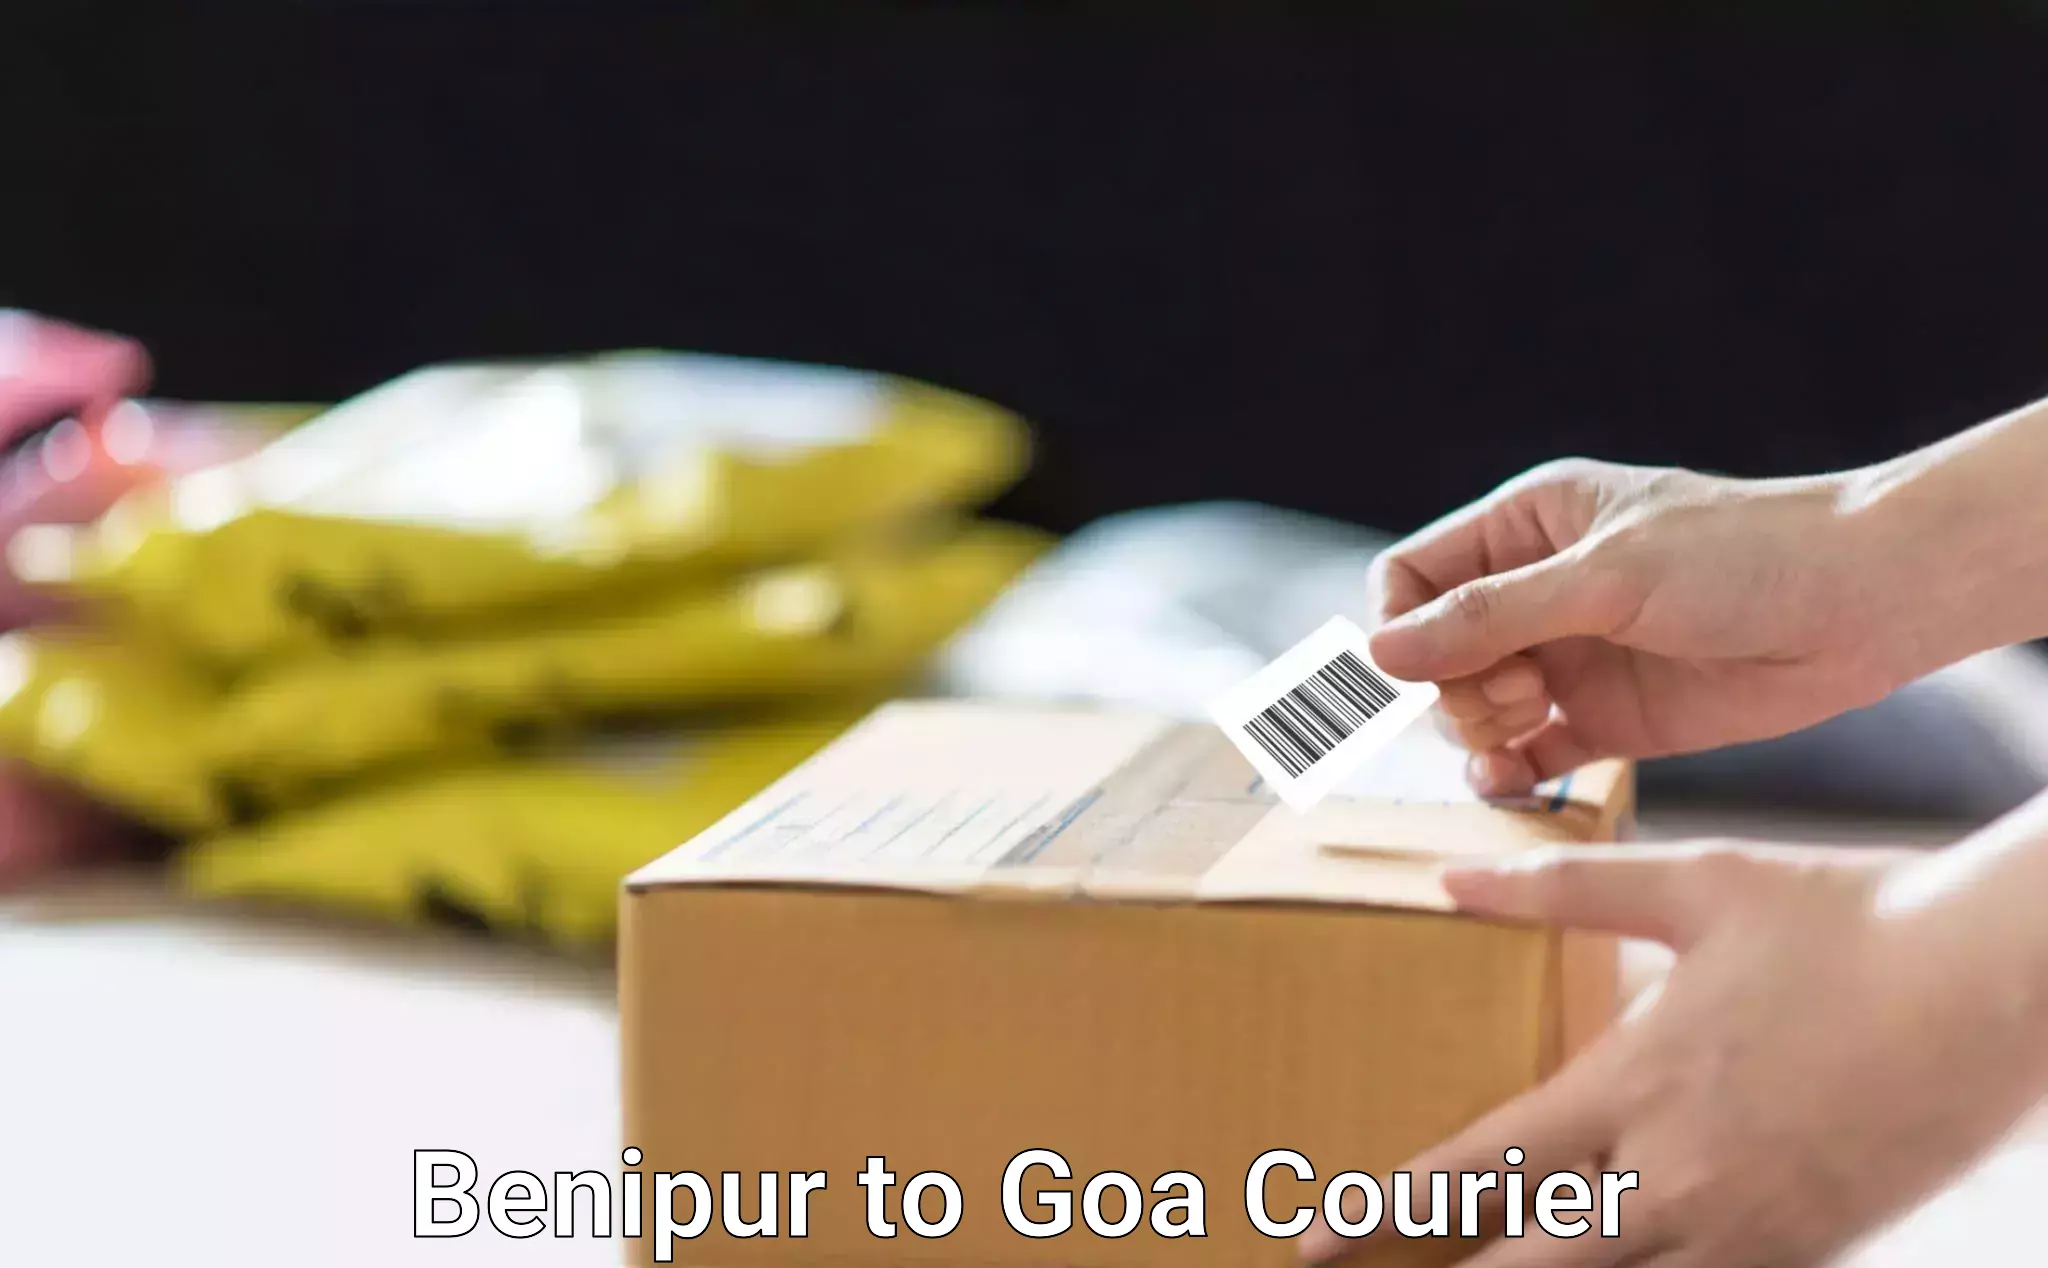 Hassle-free relocation in Benipur to Goa